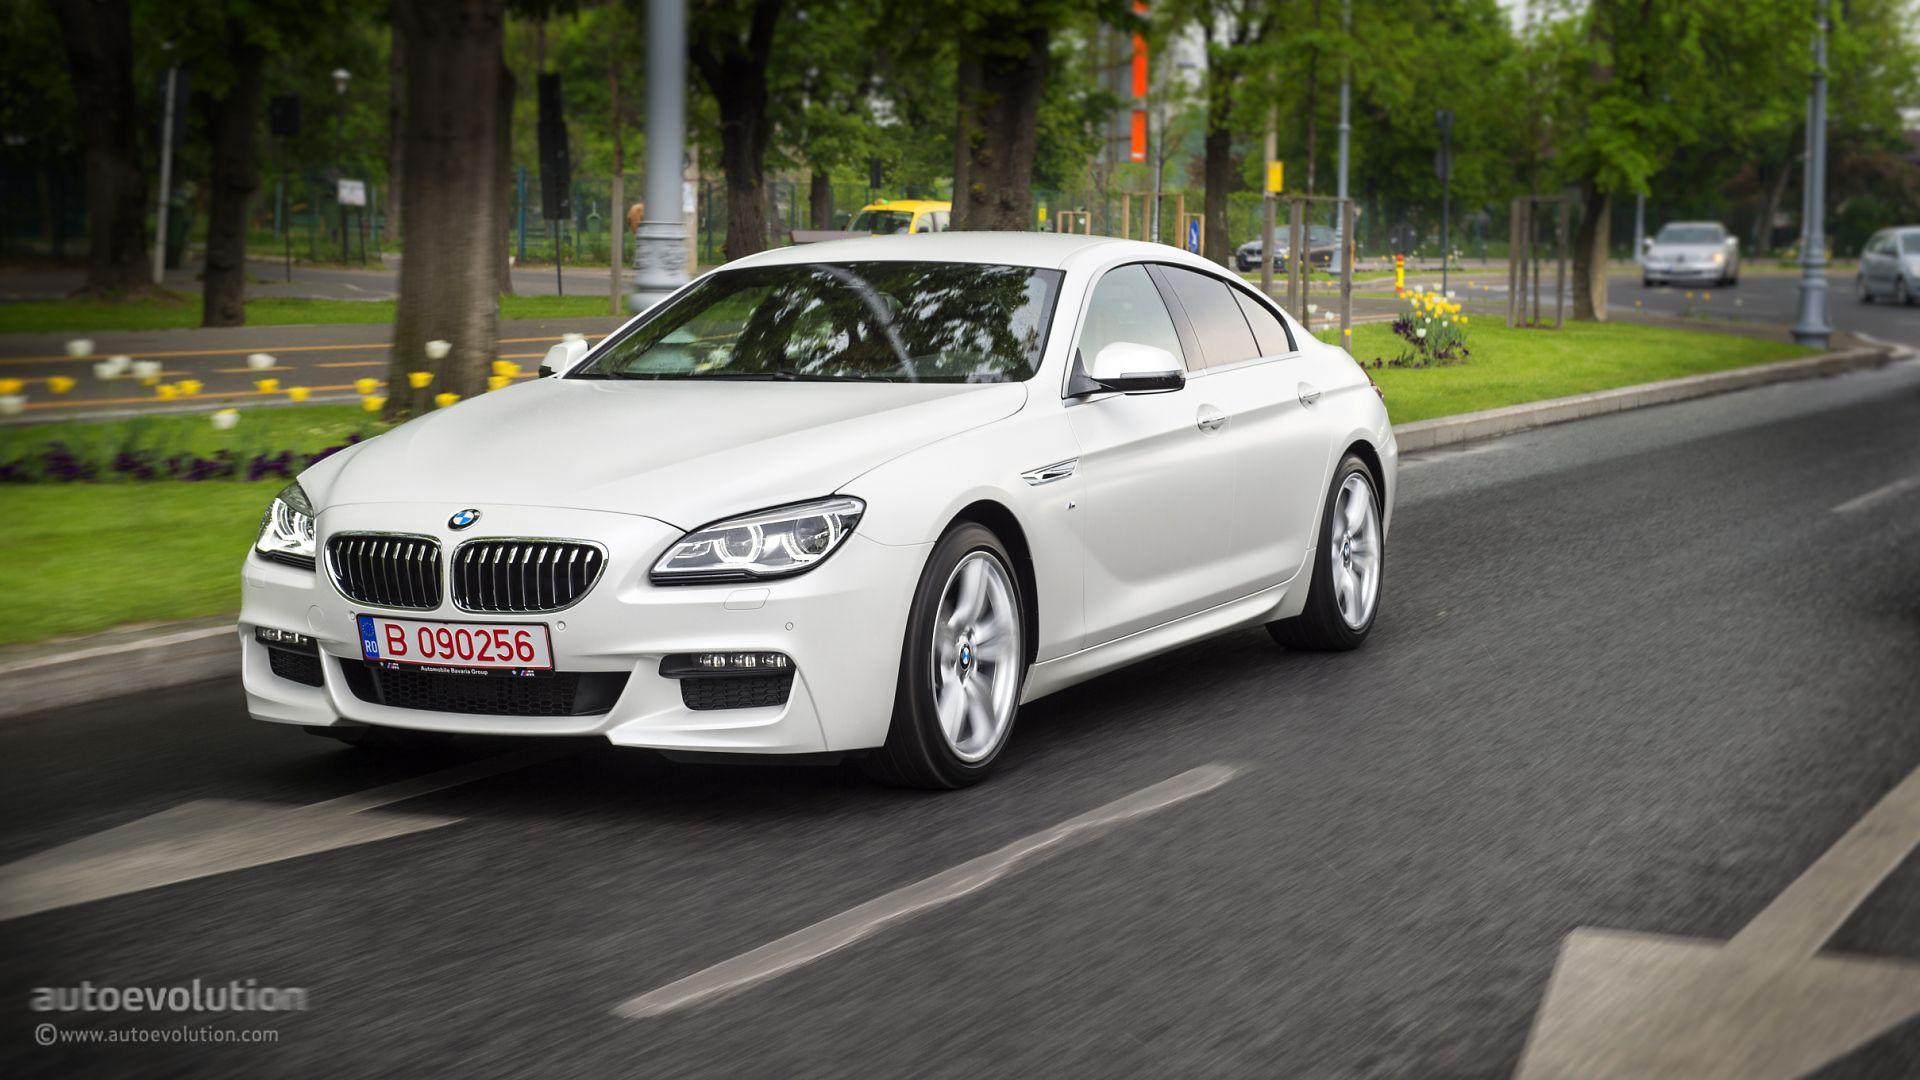 BMW 6 Series Gran Coupe Wallpaper: Bring on the Frozen Paint